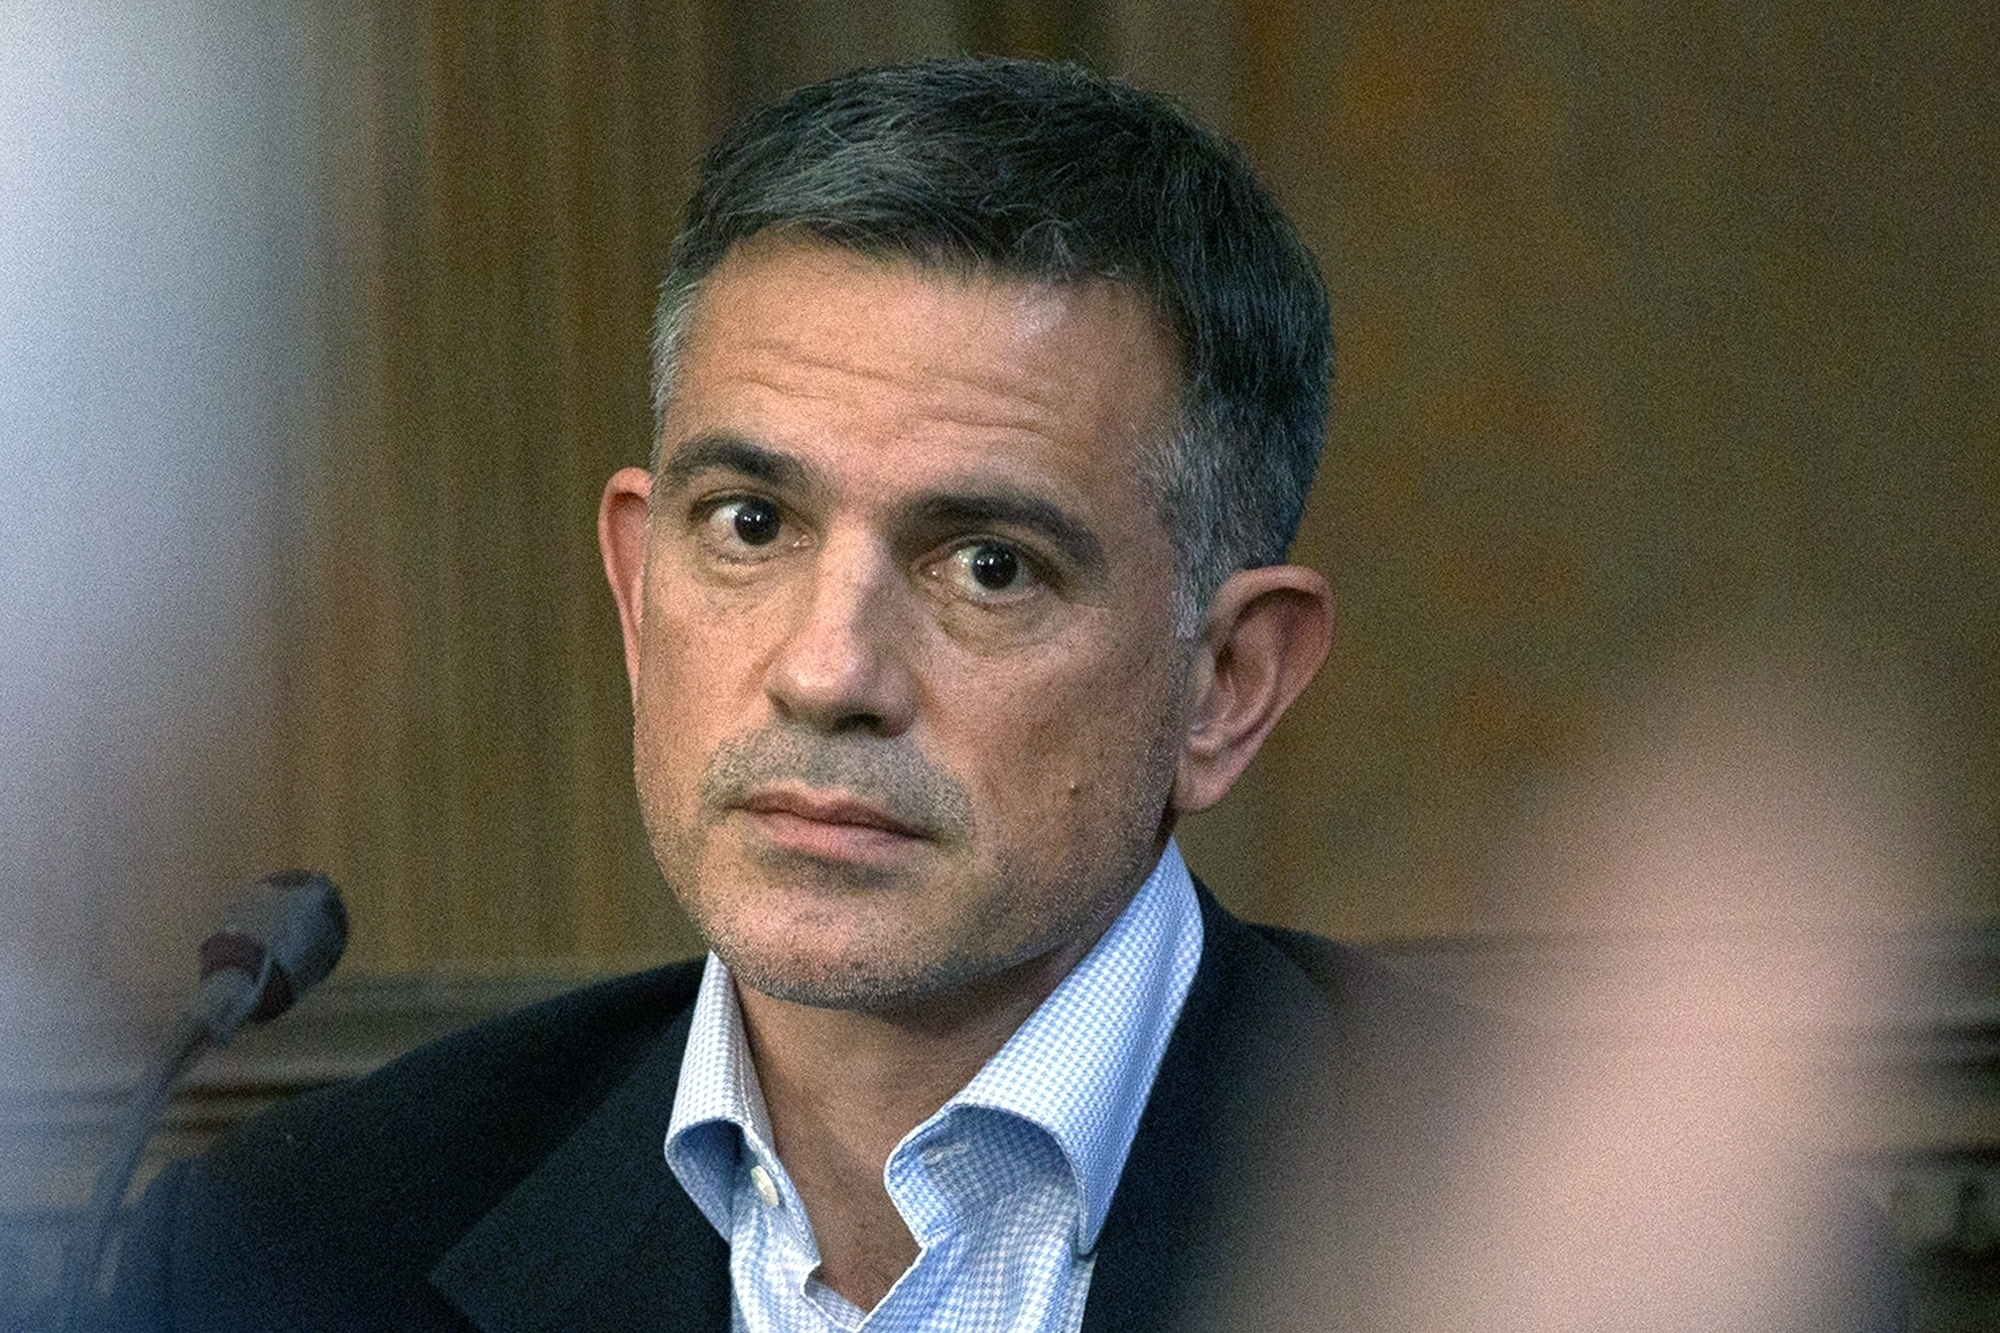 PHOTO: Fotis Dulos,  charged with murdering his estranged and missing wife, is questioned during testimony in a civil case at Hartford Superior Court in Hartford, Conn., Dec. 4, 2019.